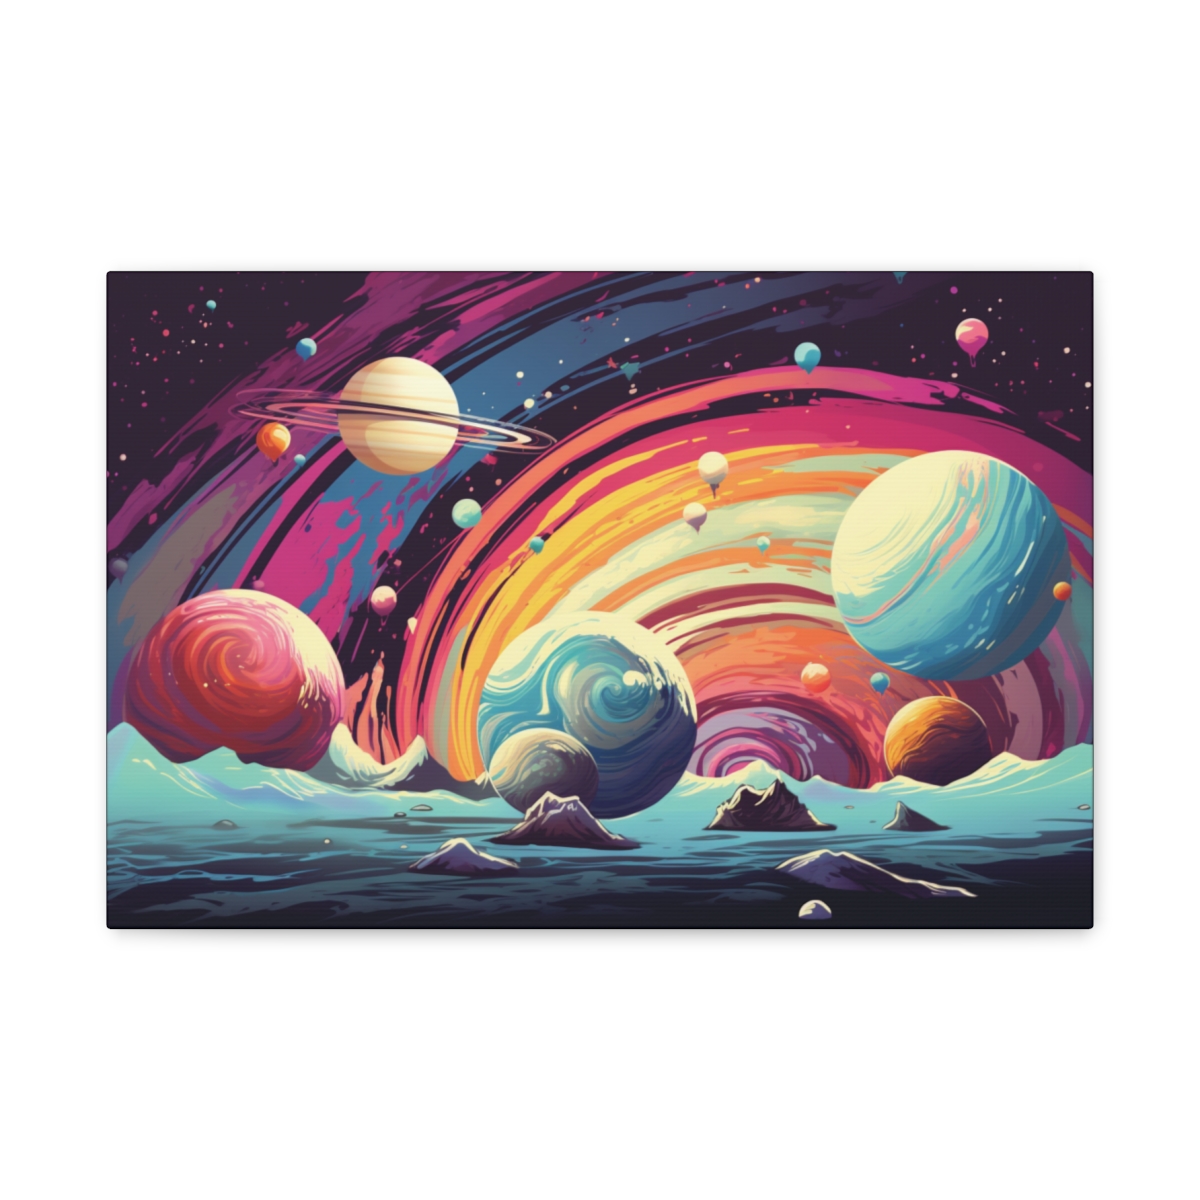 Trippy Galaxy Planets Art Canvas Print: Little Orbs Floating